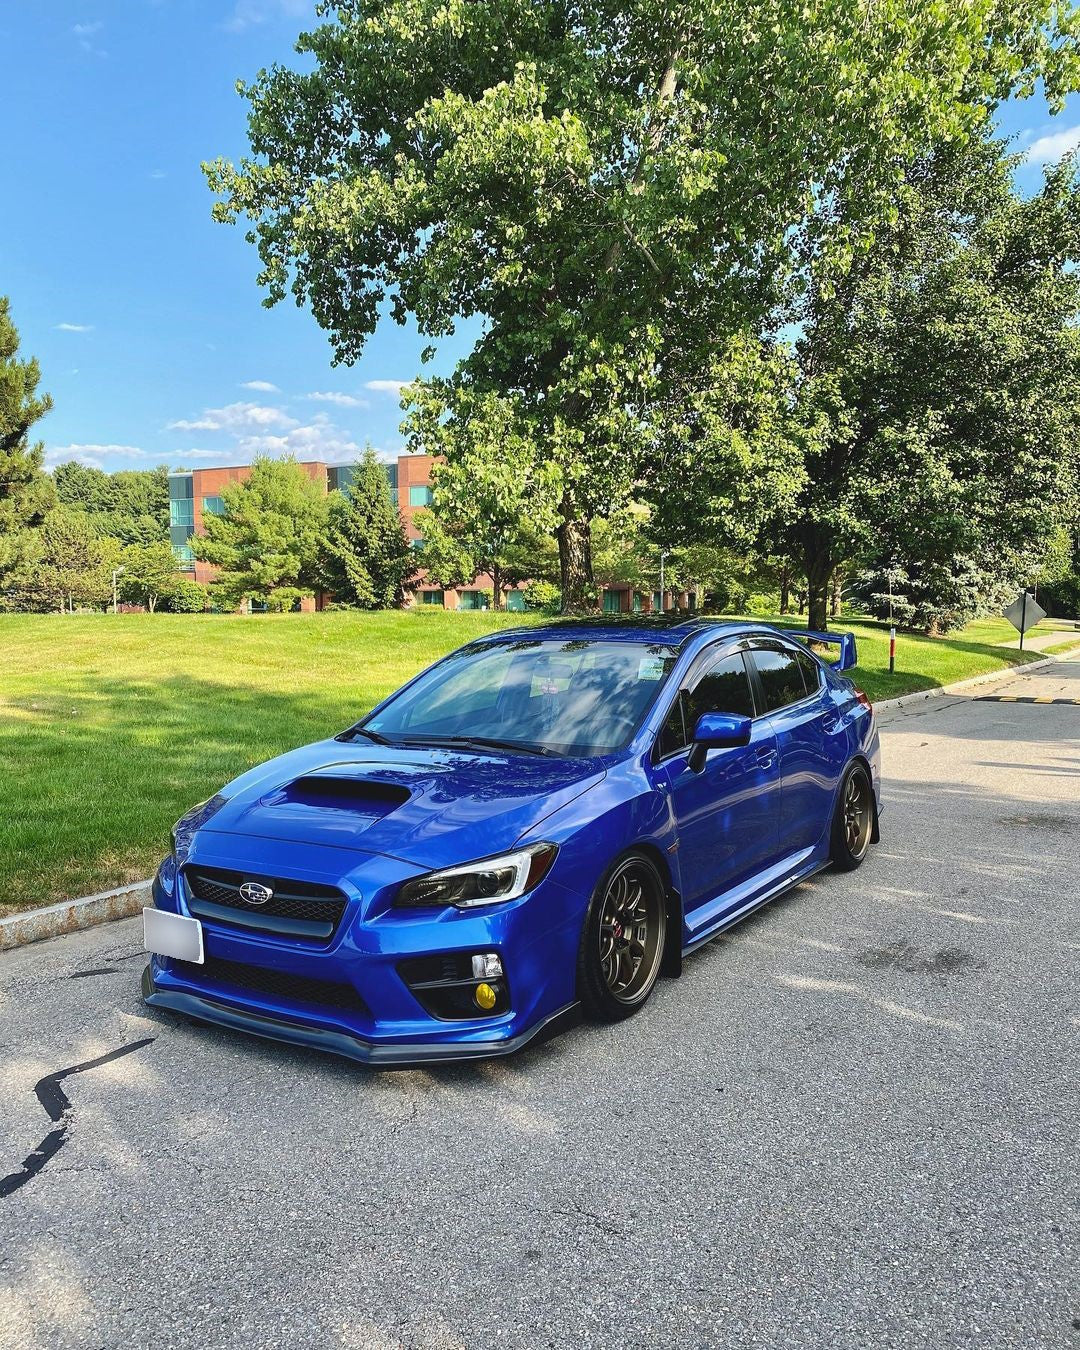 Subaru Lip Kits for the WRX STI, and more. We offer a variety of lip kits whether you have an older or newer WRX STI, etc.